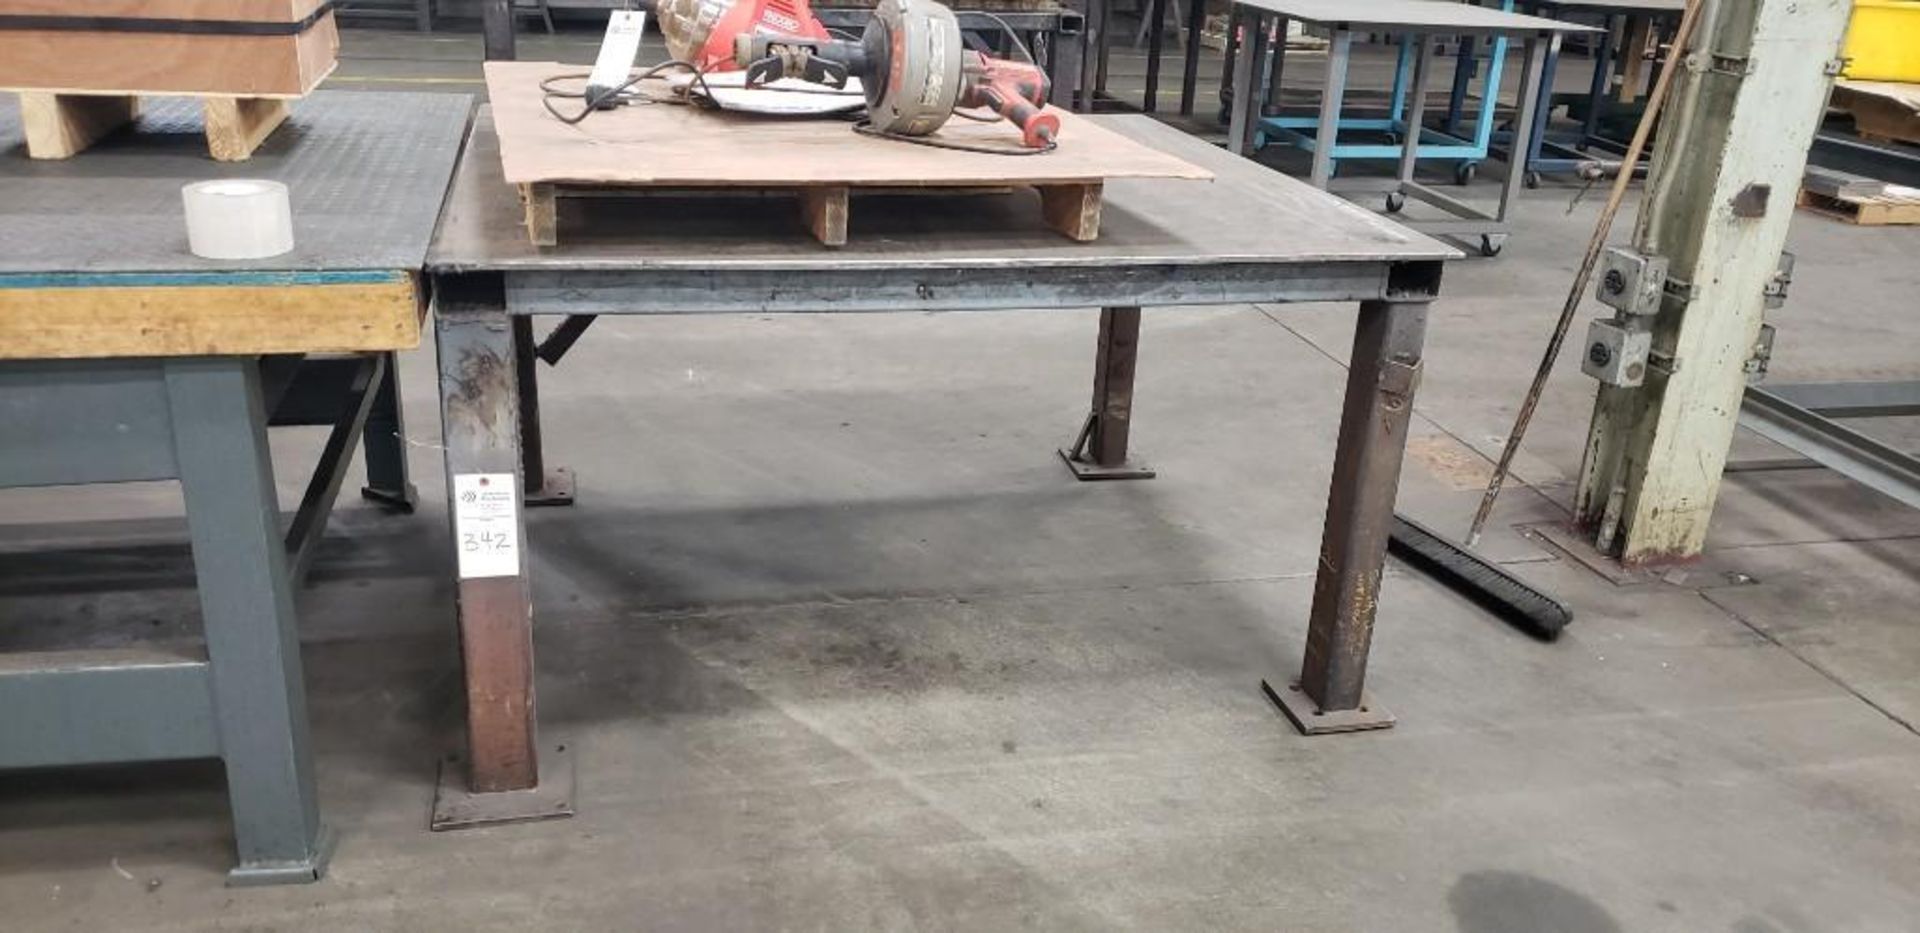 STEEL TABLE 57.5"X60" 1/2" PLATE TOP 34" HIGH